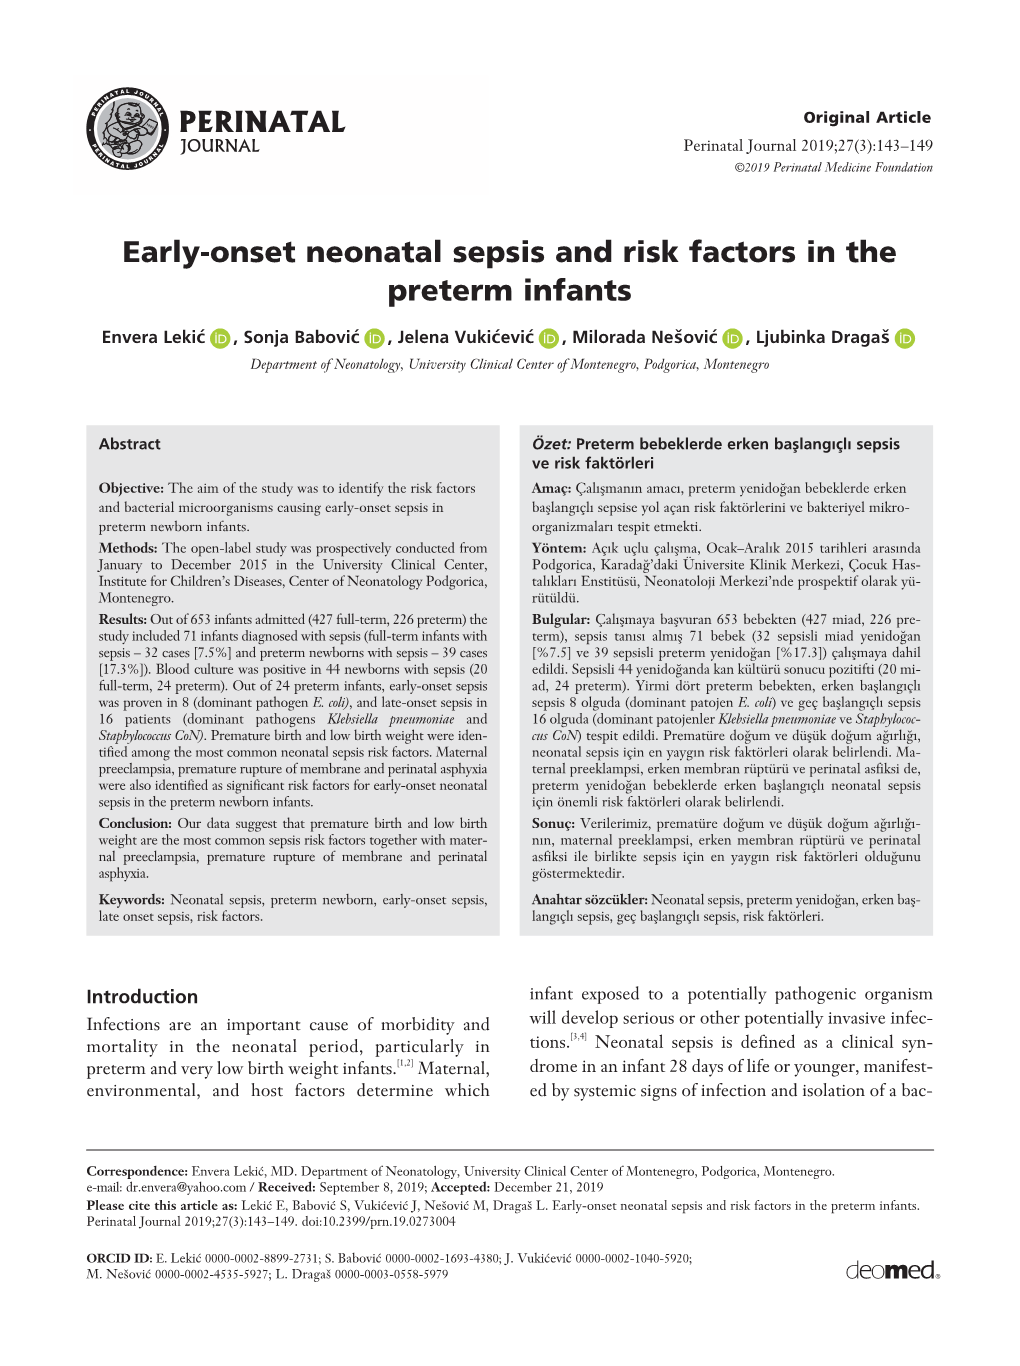 Early-Onset Neonatal Sepsis and Risk Factors in the Preterm Infants